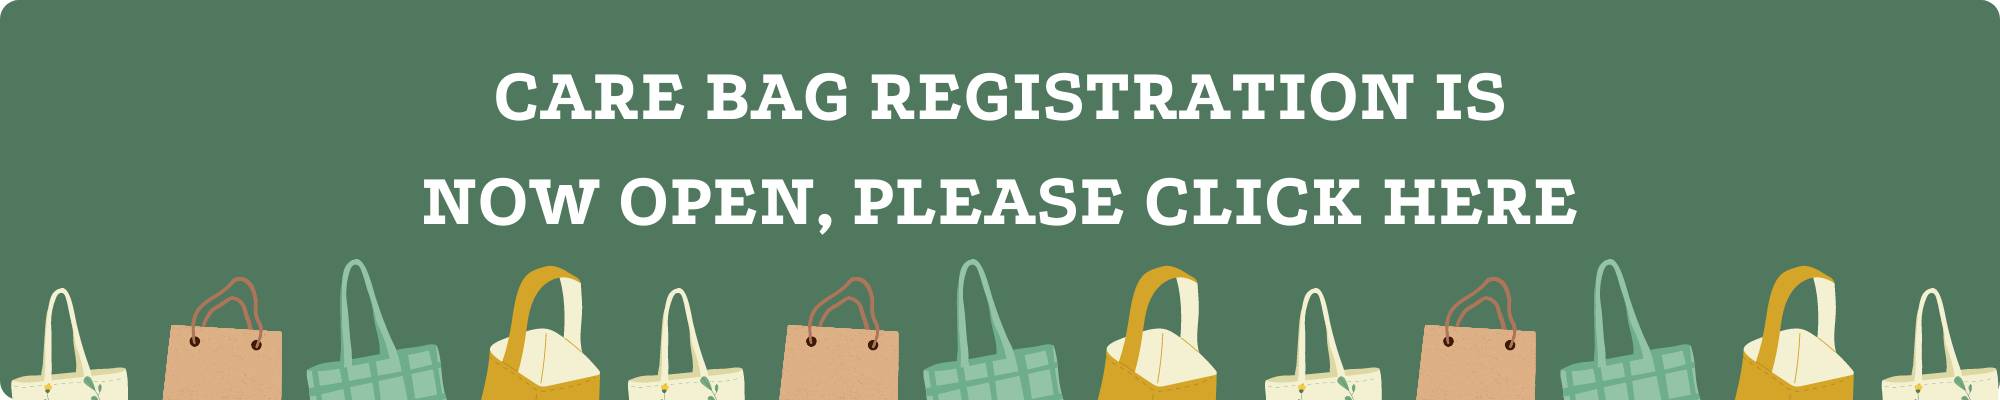 Care bag registration is now open, please click here